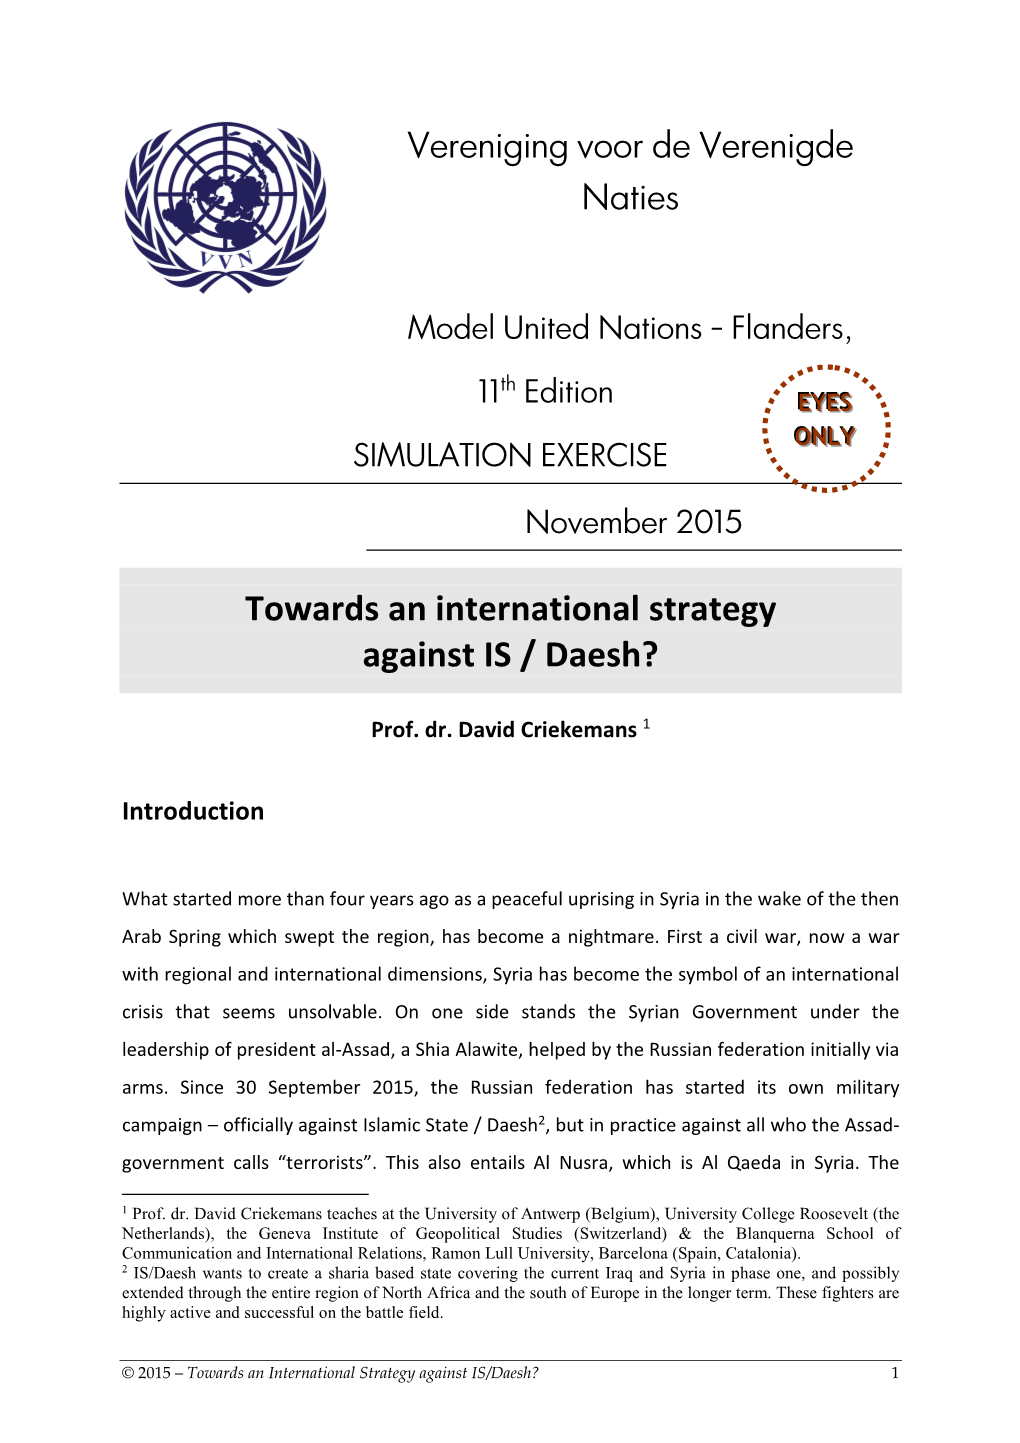 Towards an International Strategy Against IS / Daesh?